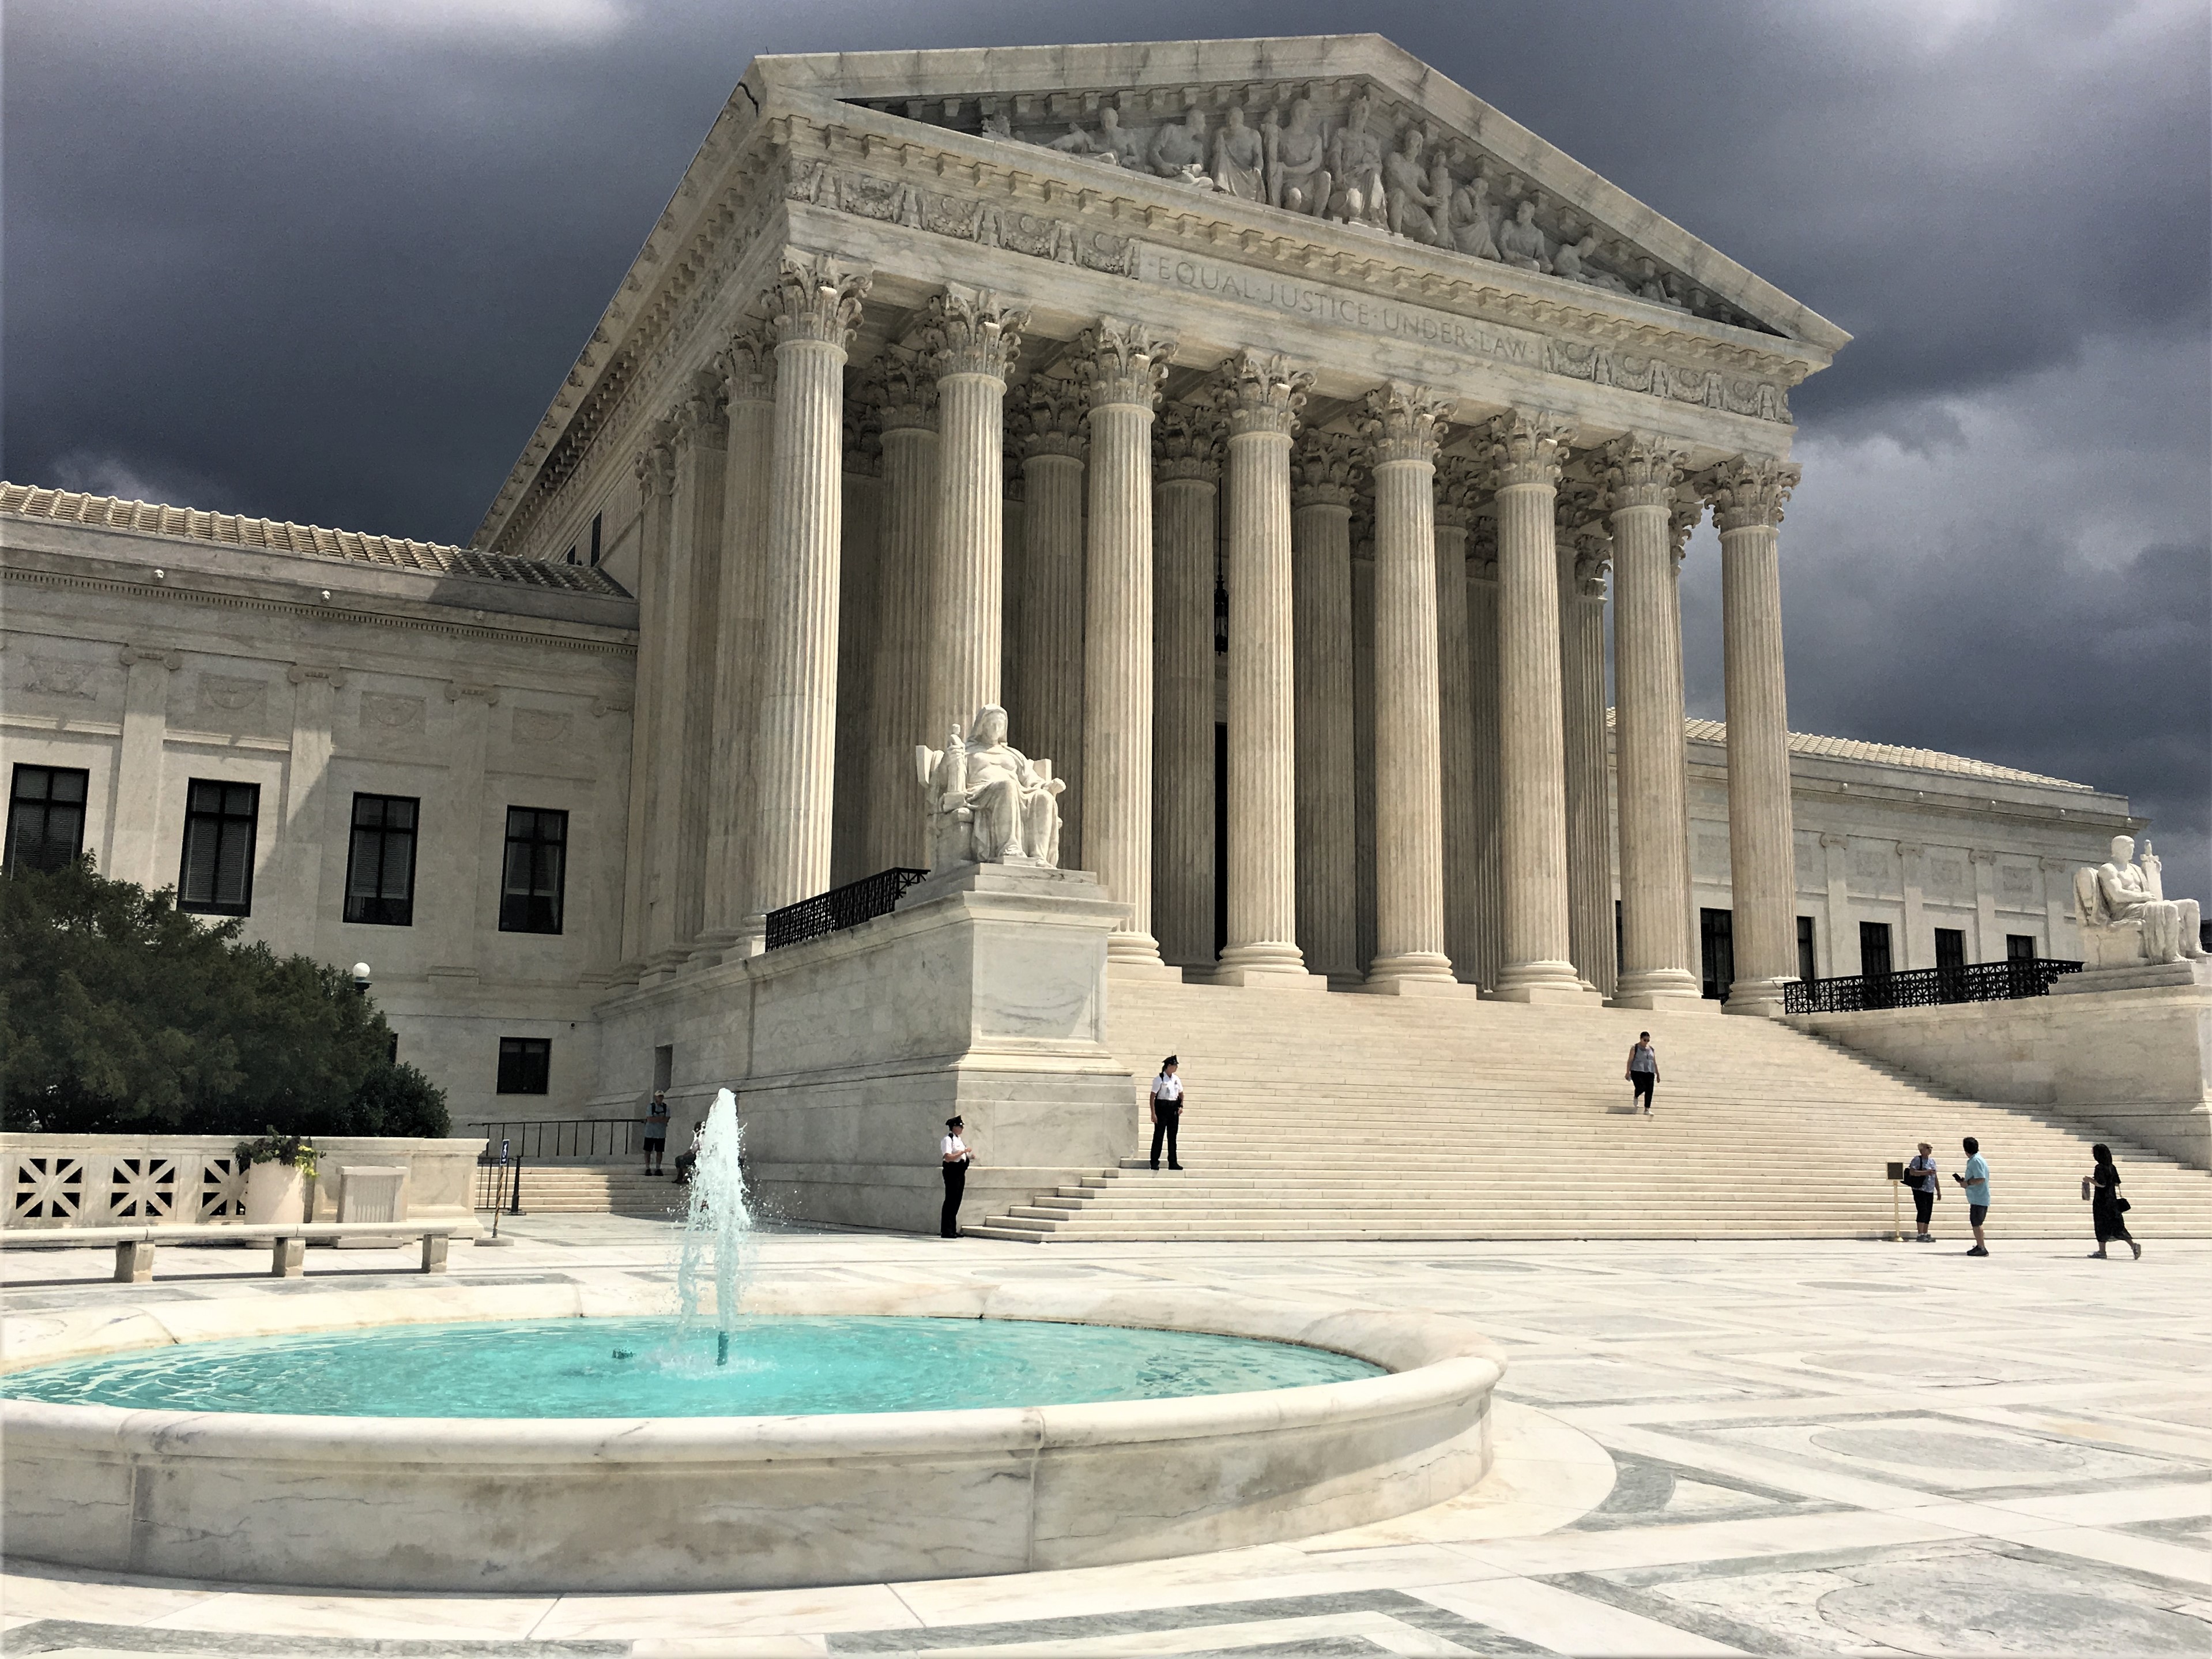 US Supreme Court reform commission releases draft materials on membership, size of court